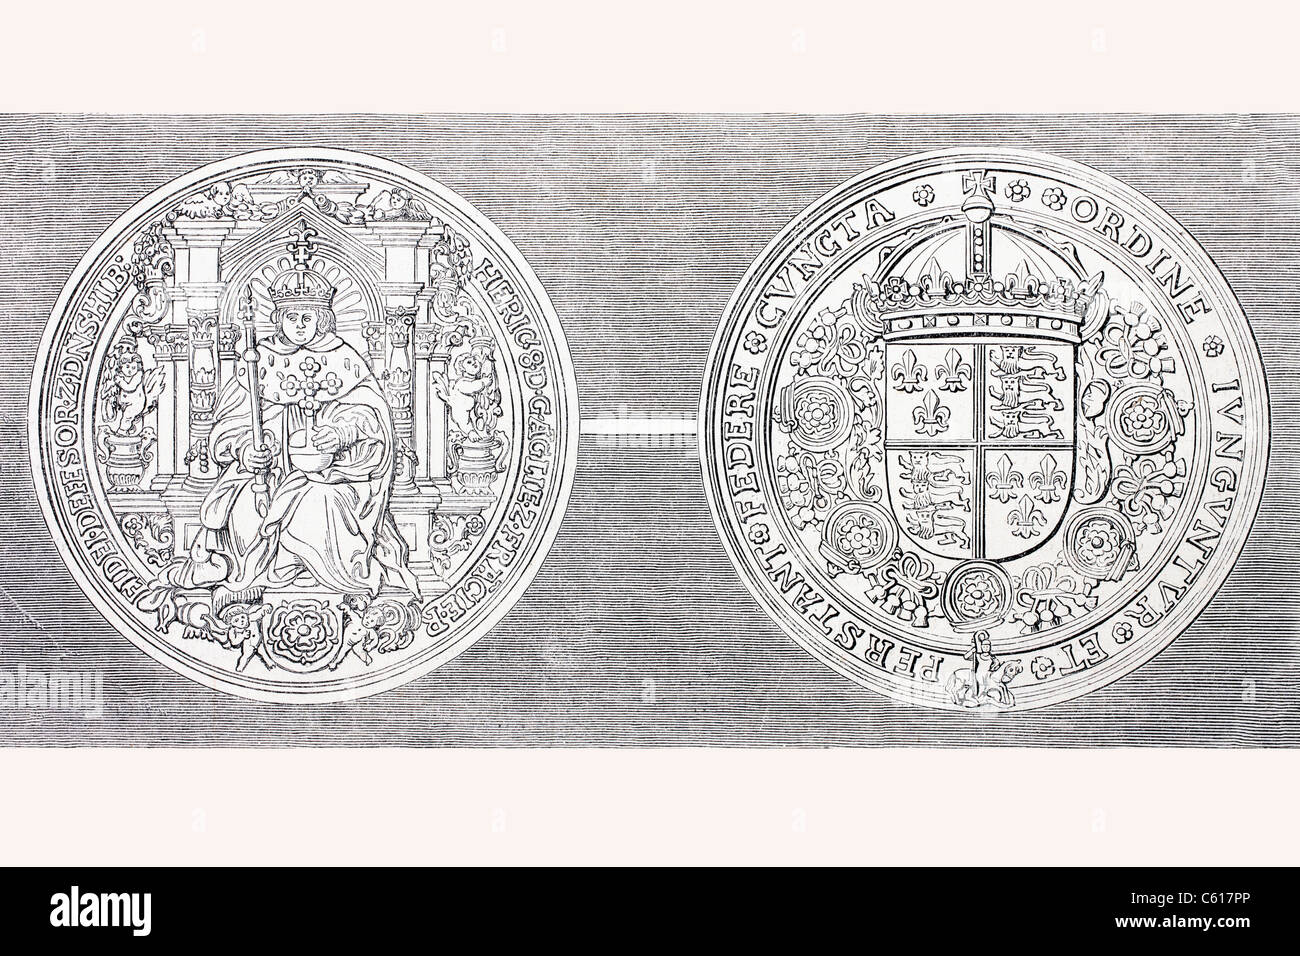 Great Seal of Henry VIII of England affixed to Treaty of Alliance of 1527 between King Henry VIII and King Francis I of France Stock Photo